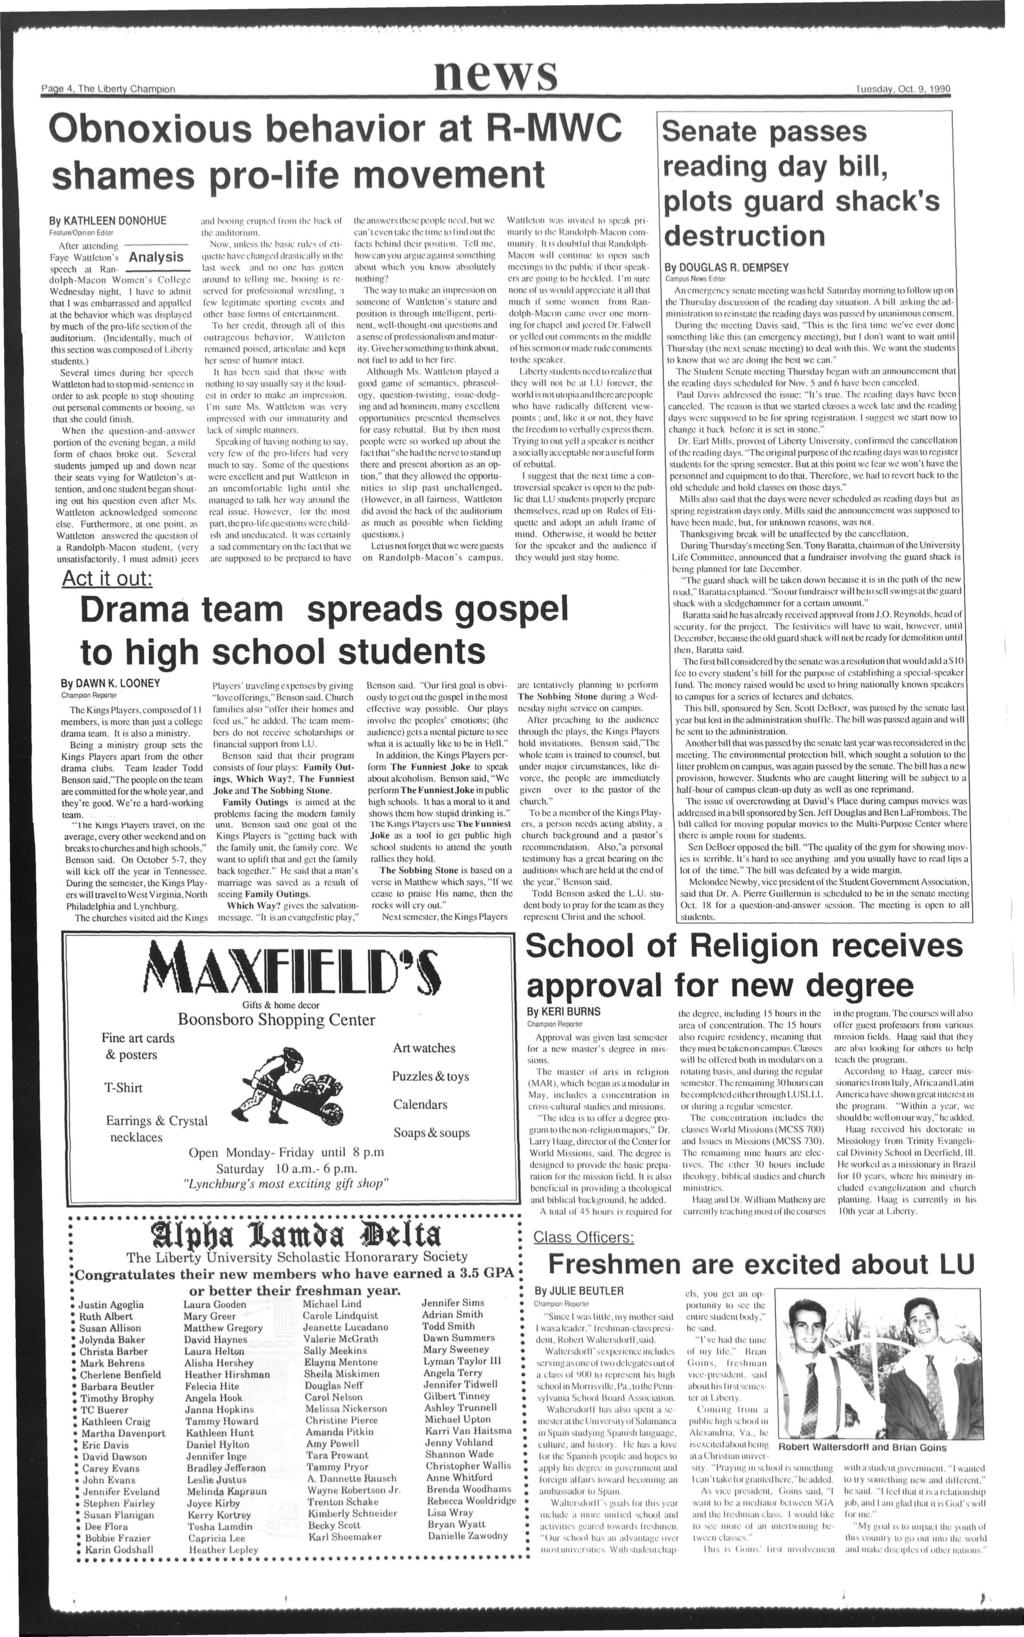 gage_yrhe^lberty Champon news Tuesday, Obnoxous behavor at R-MWC shames pro-lfe movement By KATHLEEN DONOHUE Feature/Opnon Edtor After attendng Fayc Wattleton's Analyss speech at Randolph-Macon